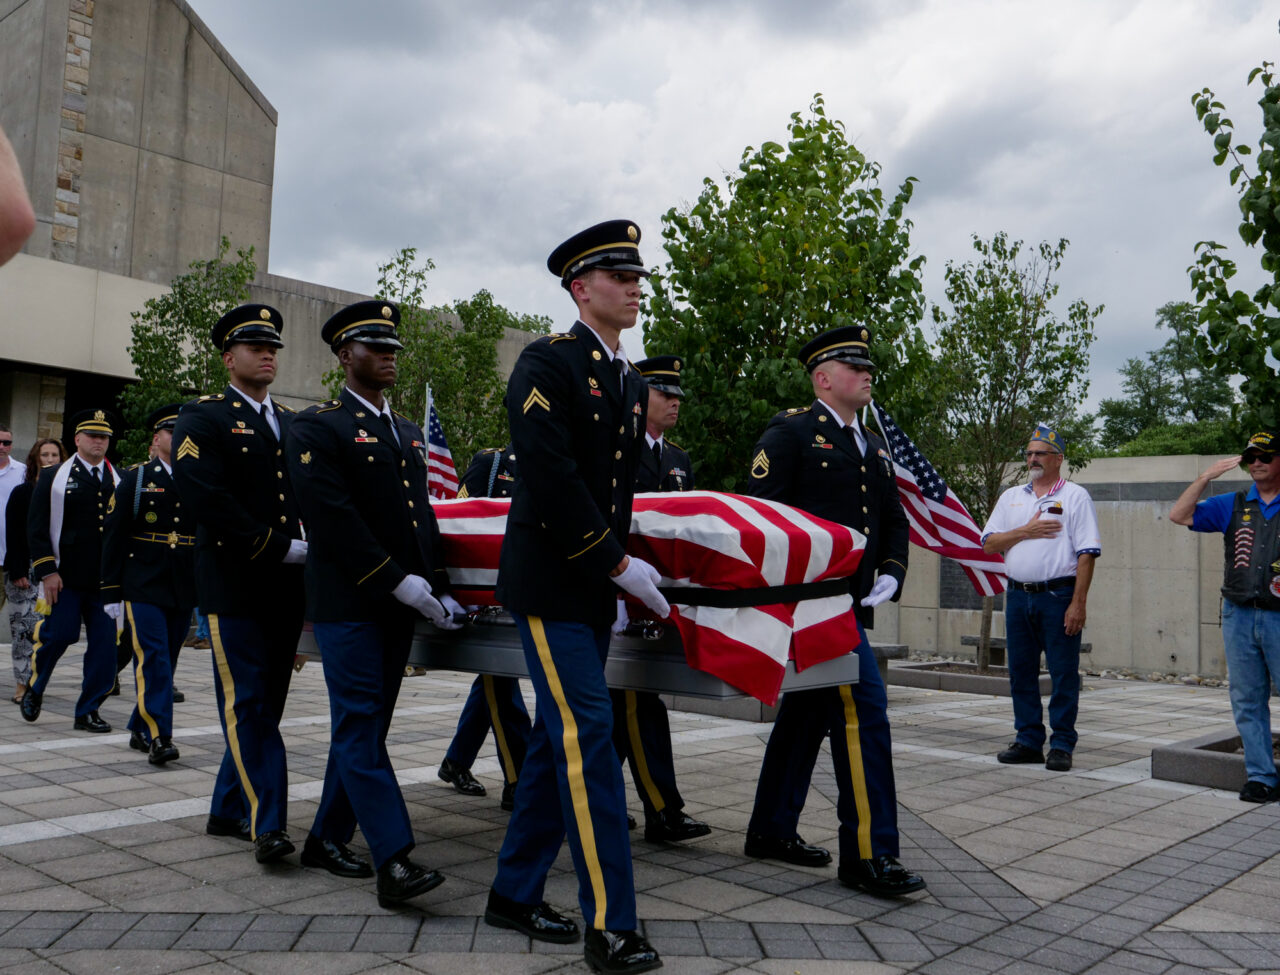 Lancaster County Native and Korean War veteran Donald Born is laid to rest at Indiantown Gap National Cemetery.